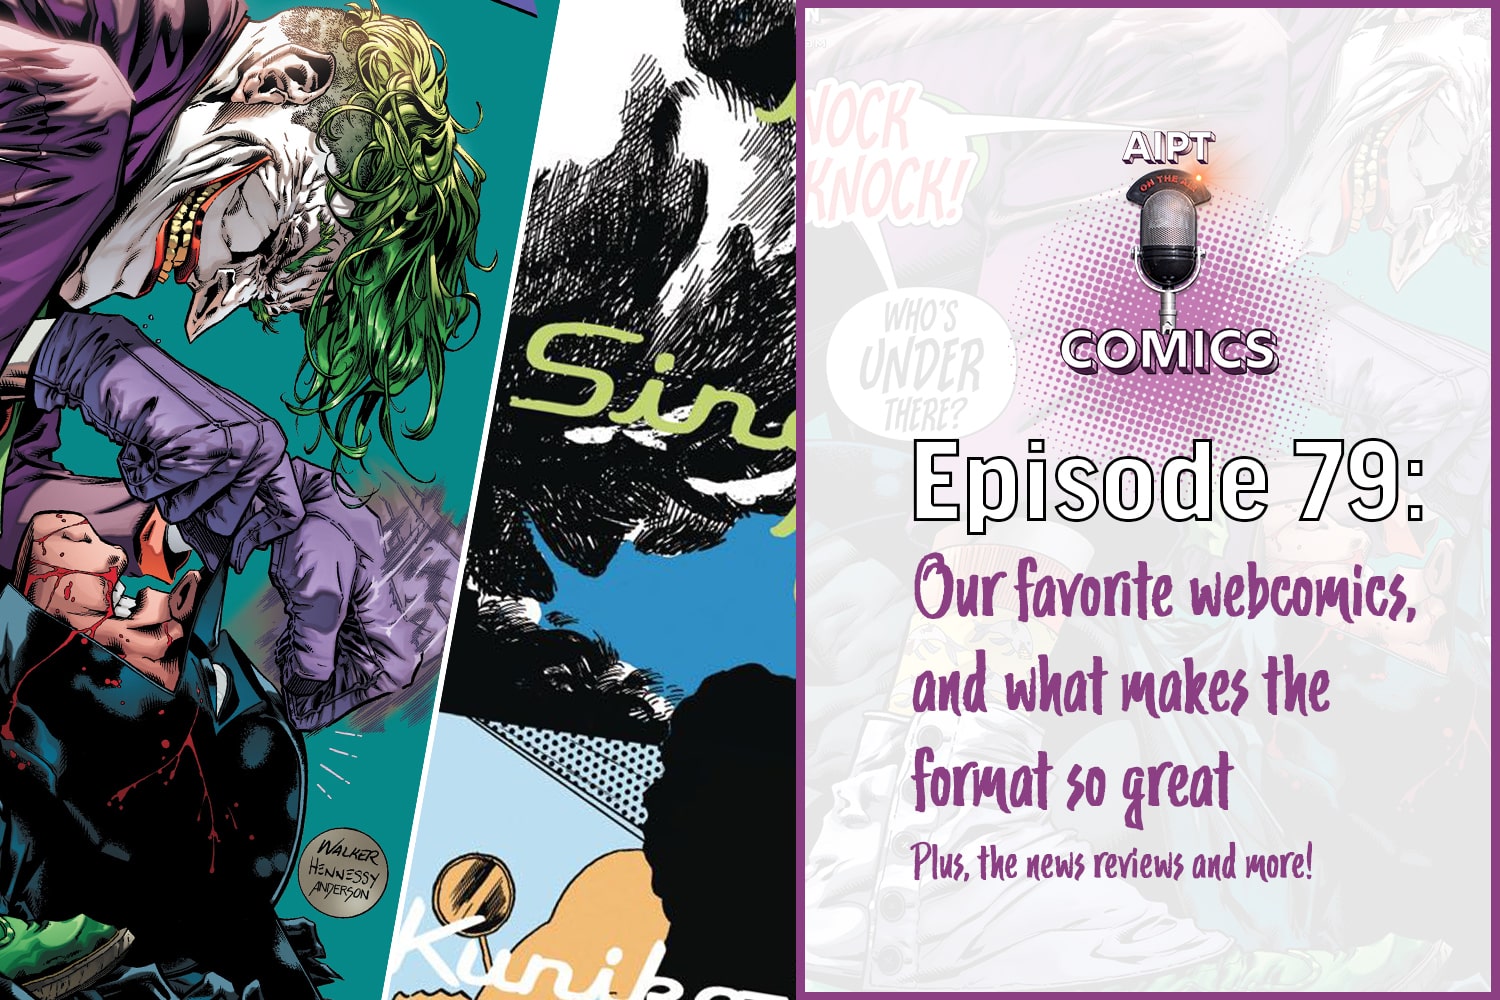 AIPT Comics Podcast Episode 79: Our favorite webcomics and what makes the format so great